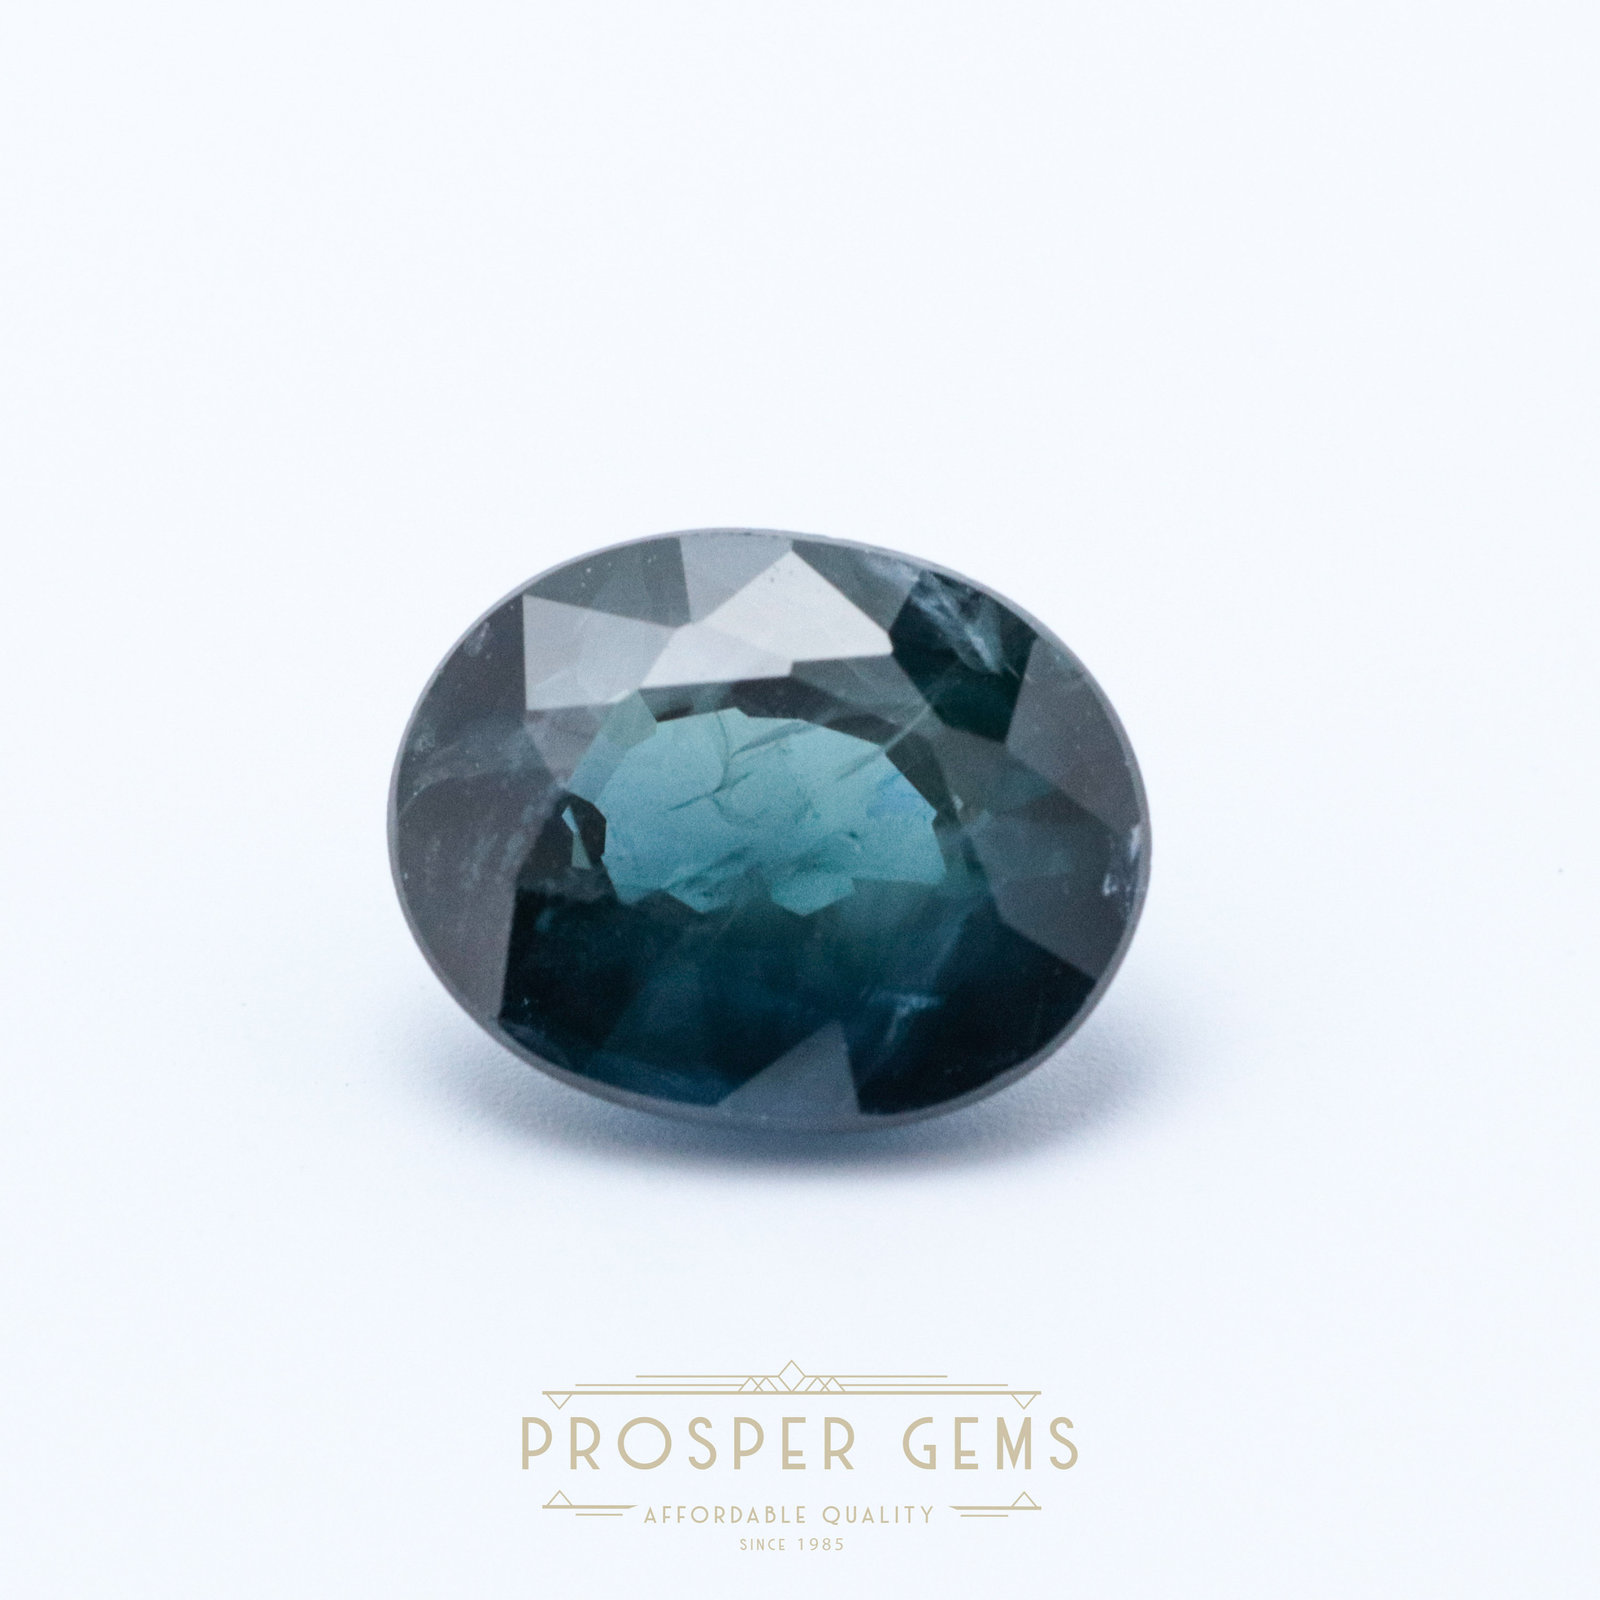 Primary image for 2.4cts, Natural Teal Sapphire Gemstone 9x7, September Birthstone, Precious Stone